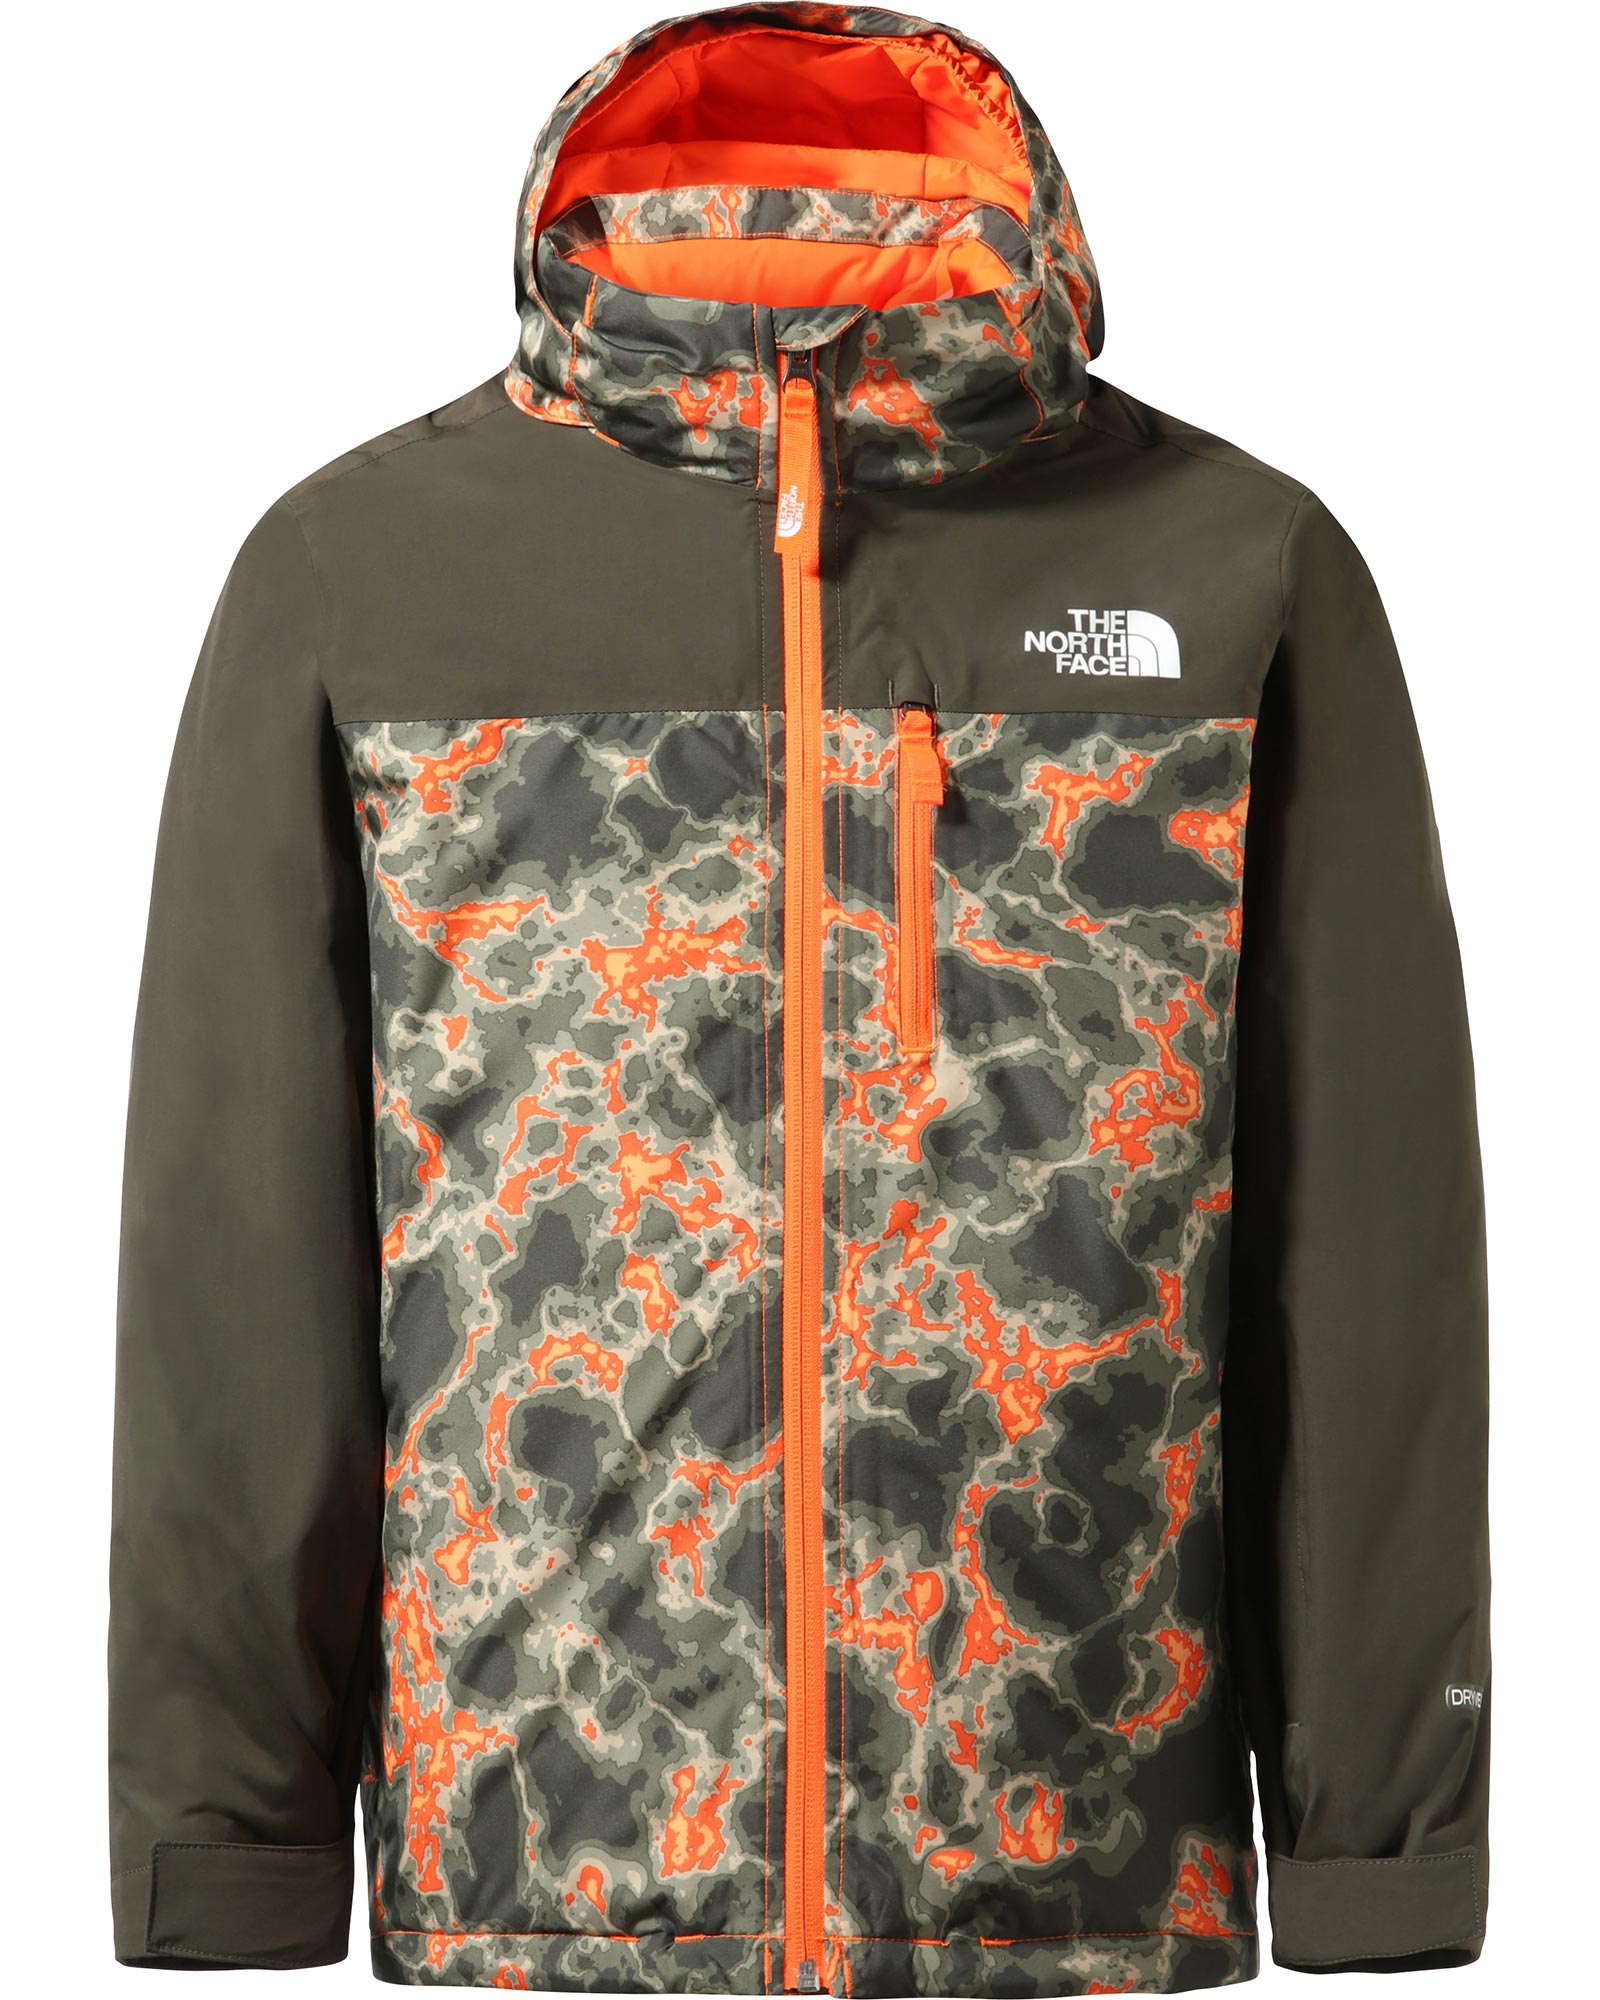 Product image of The North Face Snowquest Plus Kids' Insulated Jacket